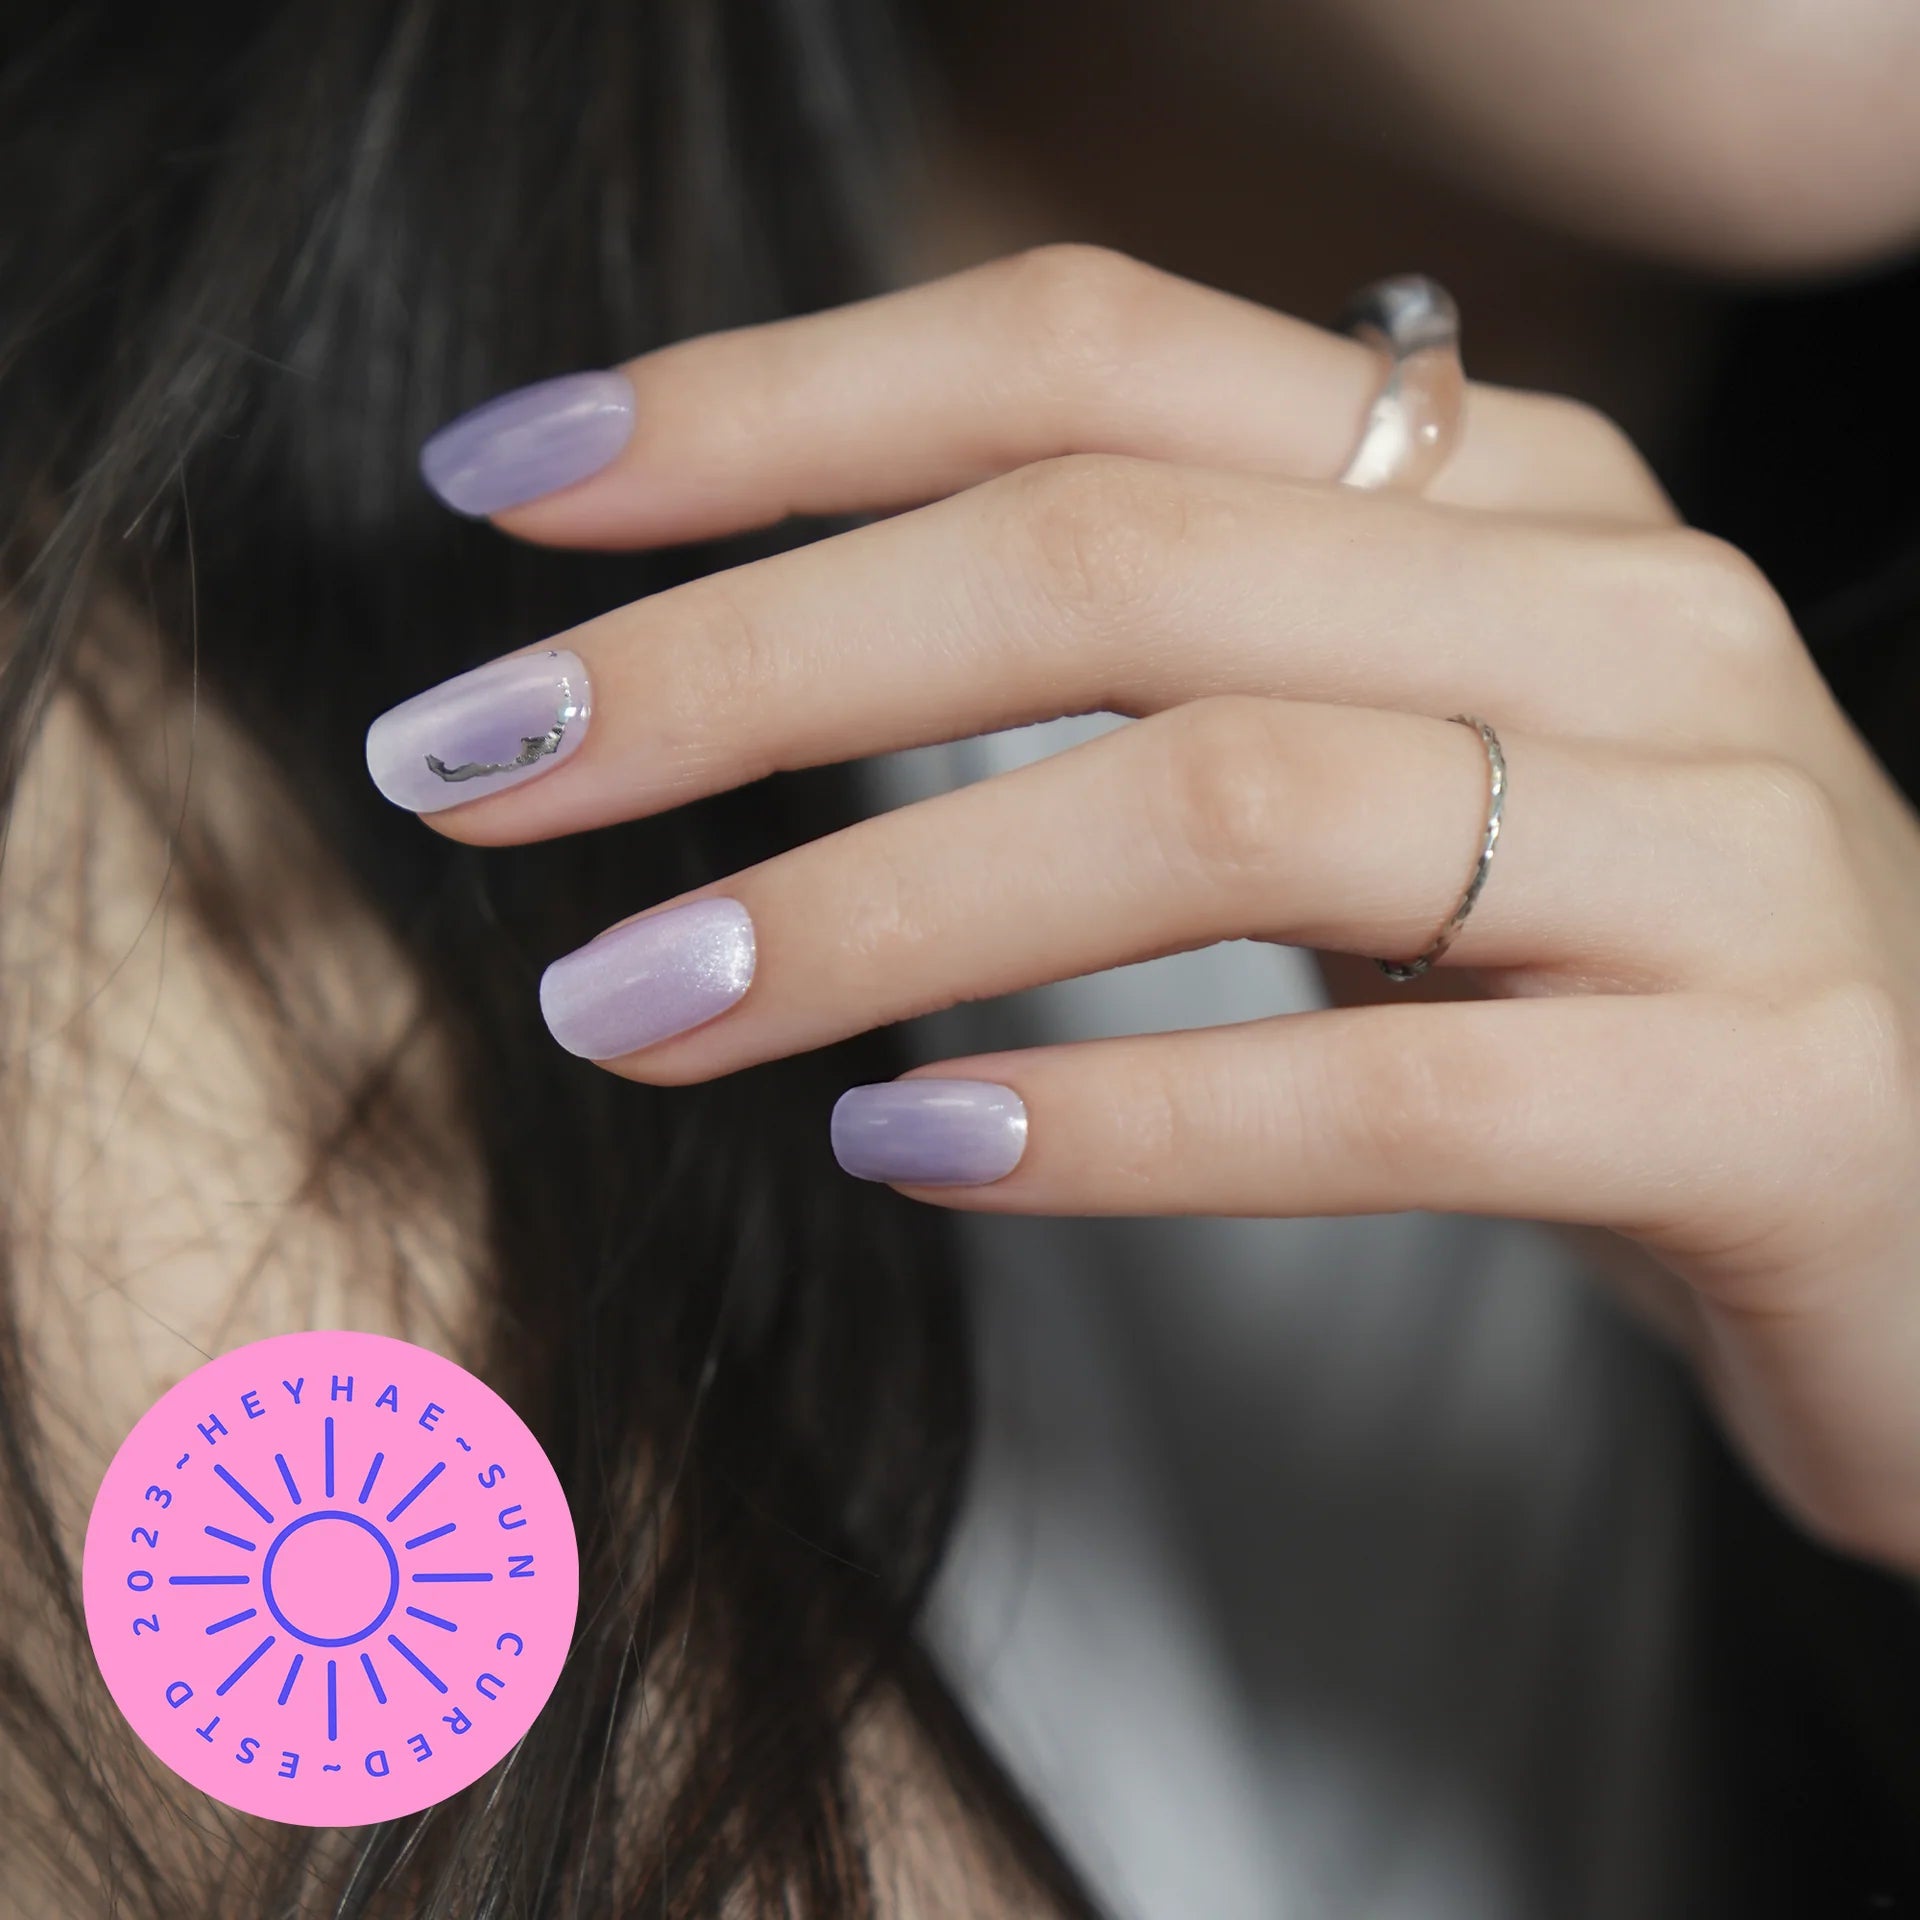 The Daily Durability of Heyhae Sun-Cured Gel Nails: A 14-Day Journey